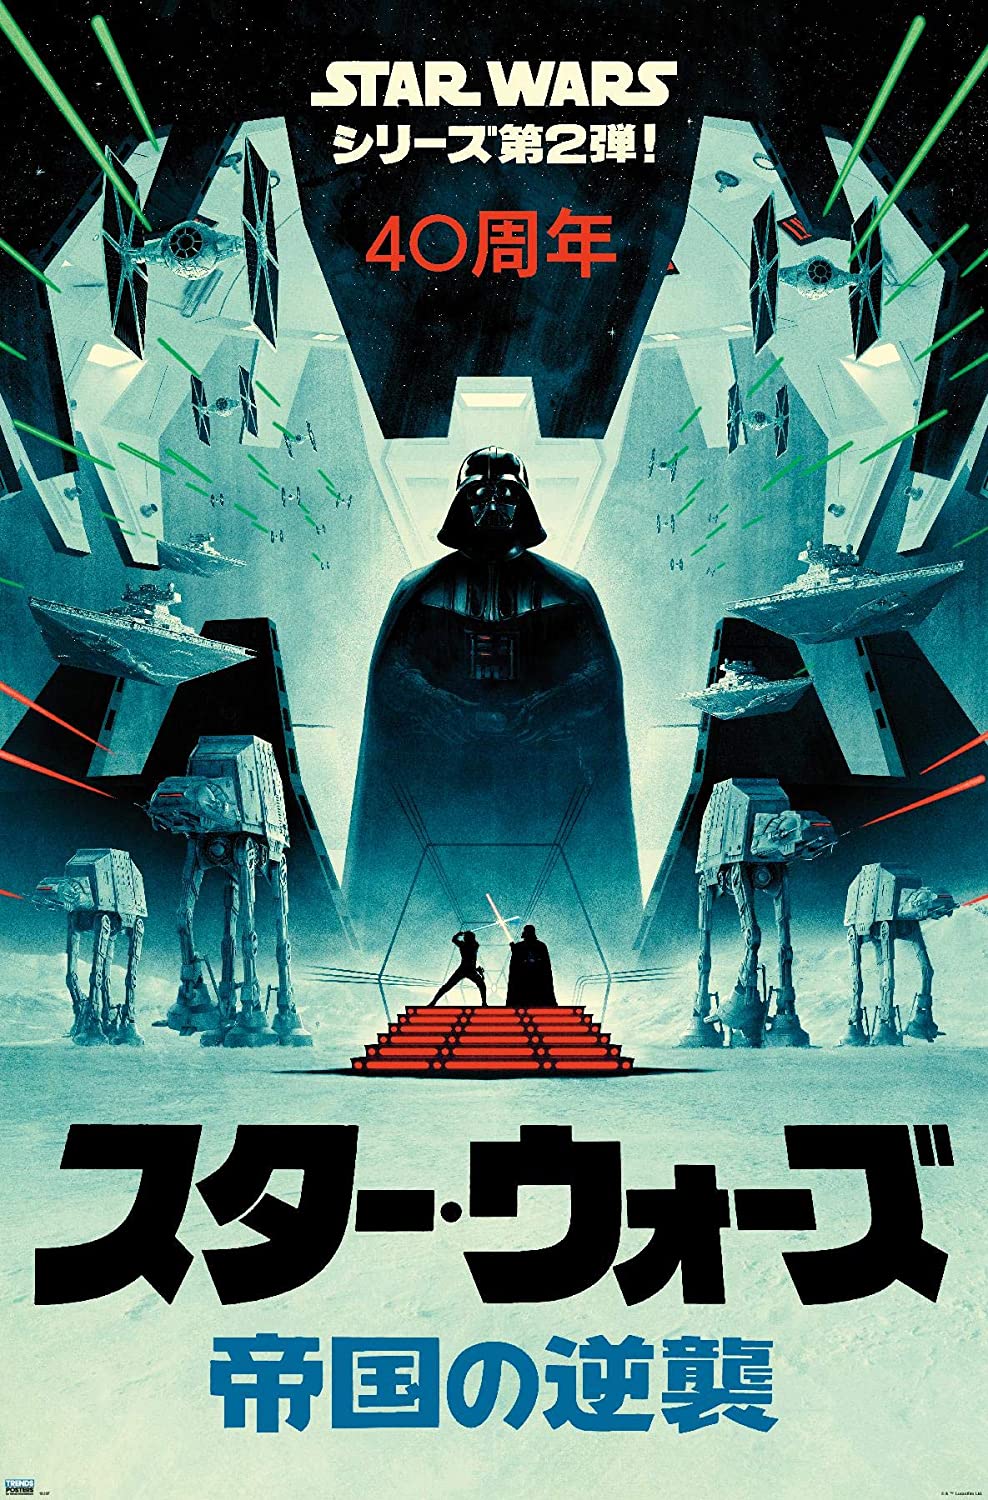 Star Wars: The Empire Strikes Back - 40th Anniversary Japan Wall Poster $9.99